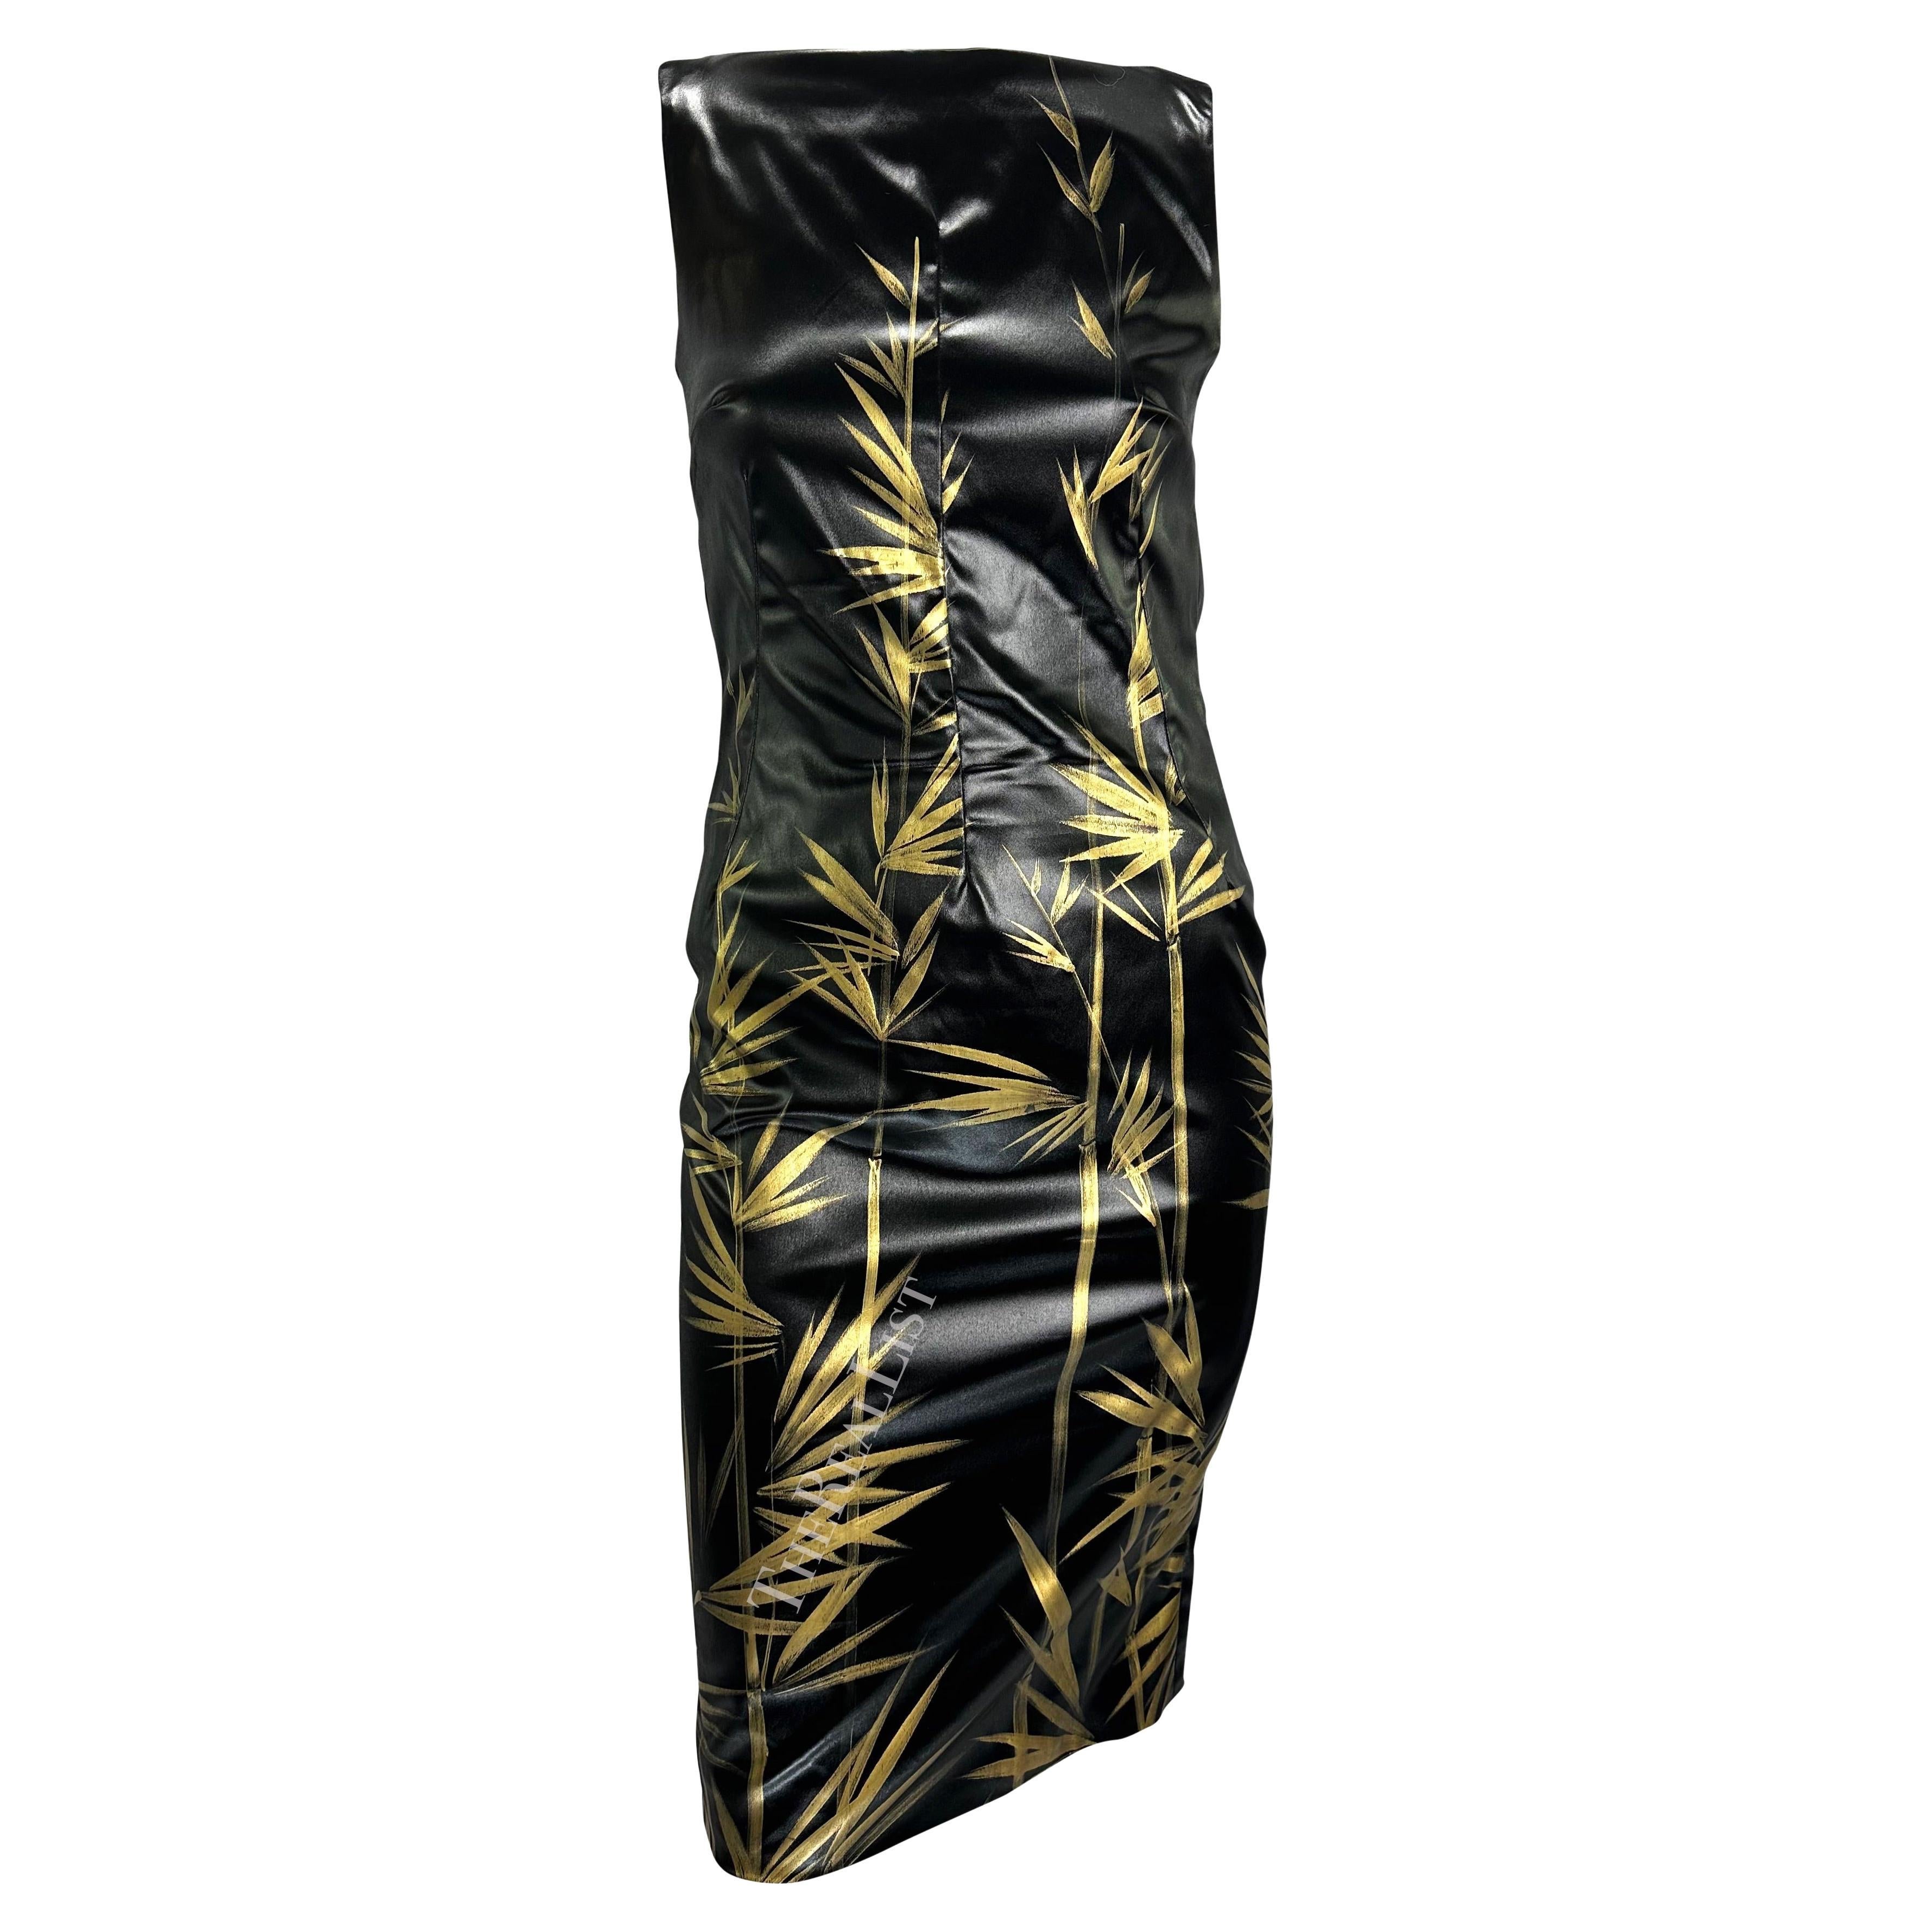 F/W 1999 Dolce & Gabbana Black 'Wet Look' Hand-Painted Gold Bamboo Bodycon Dress For Sale